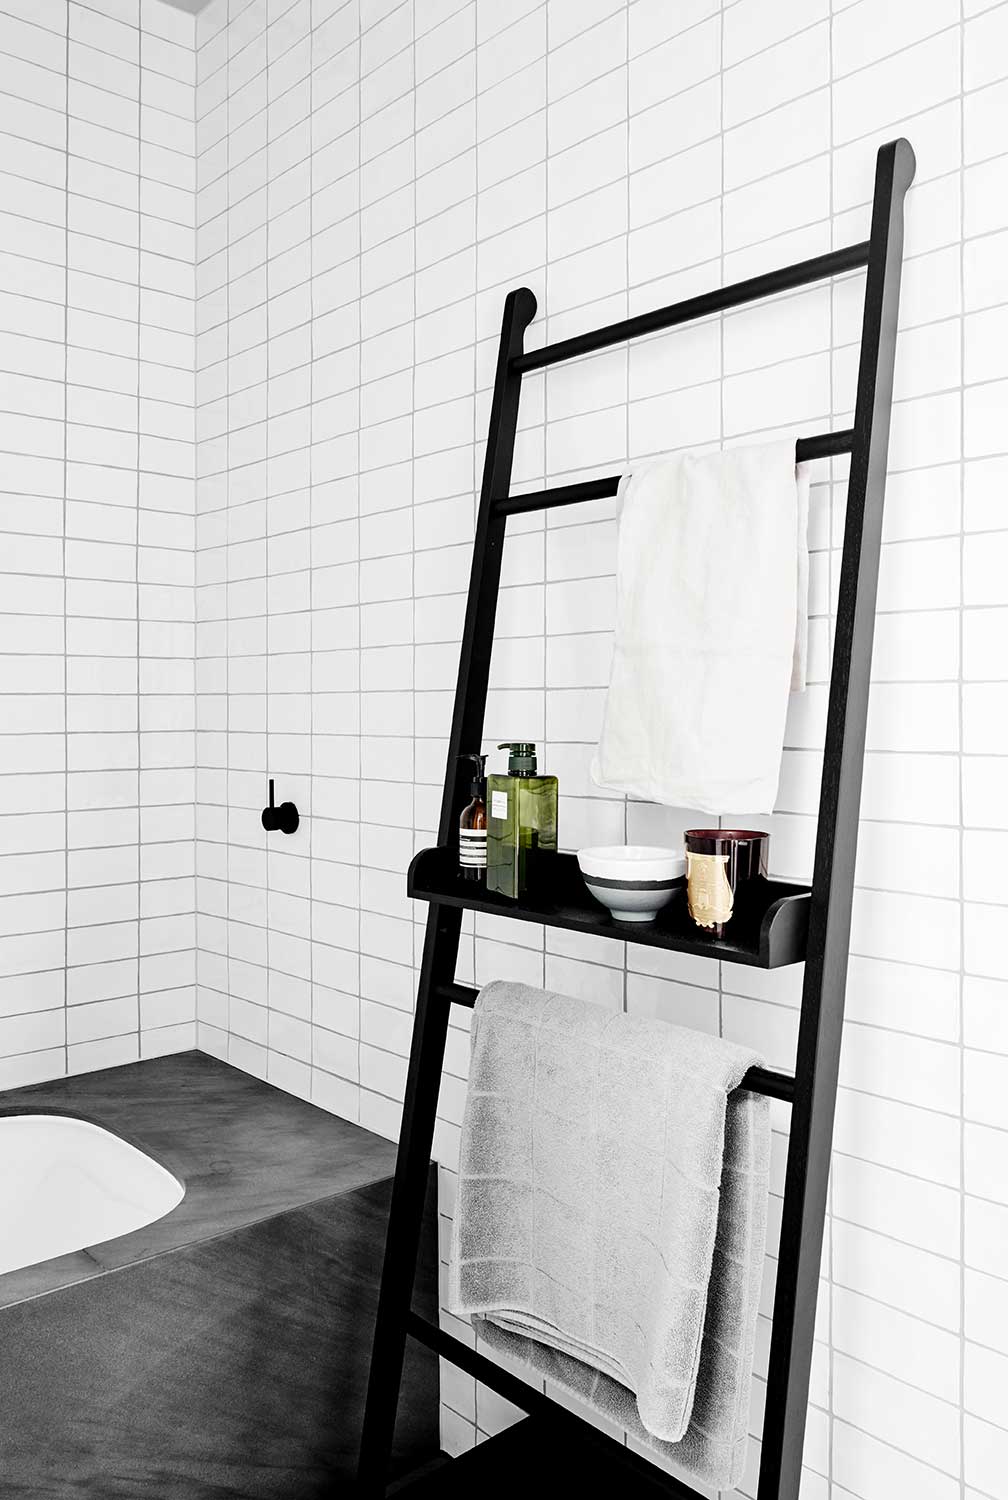 Stacked subway tile with dark grout for a modern industrial look. Image via Flack Studio